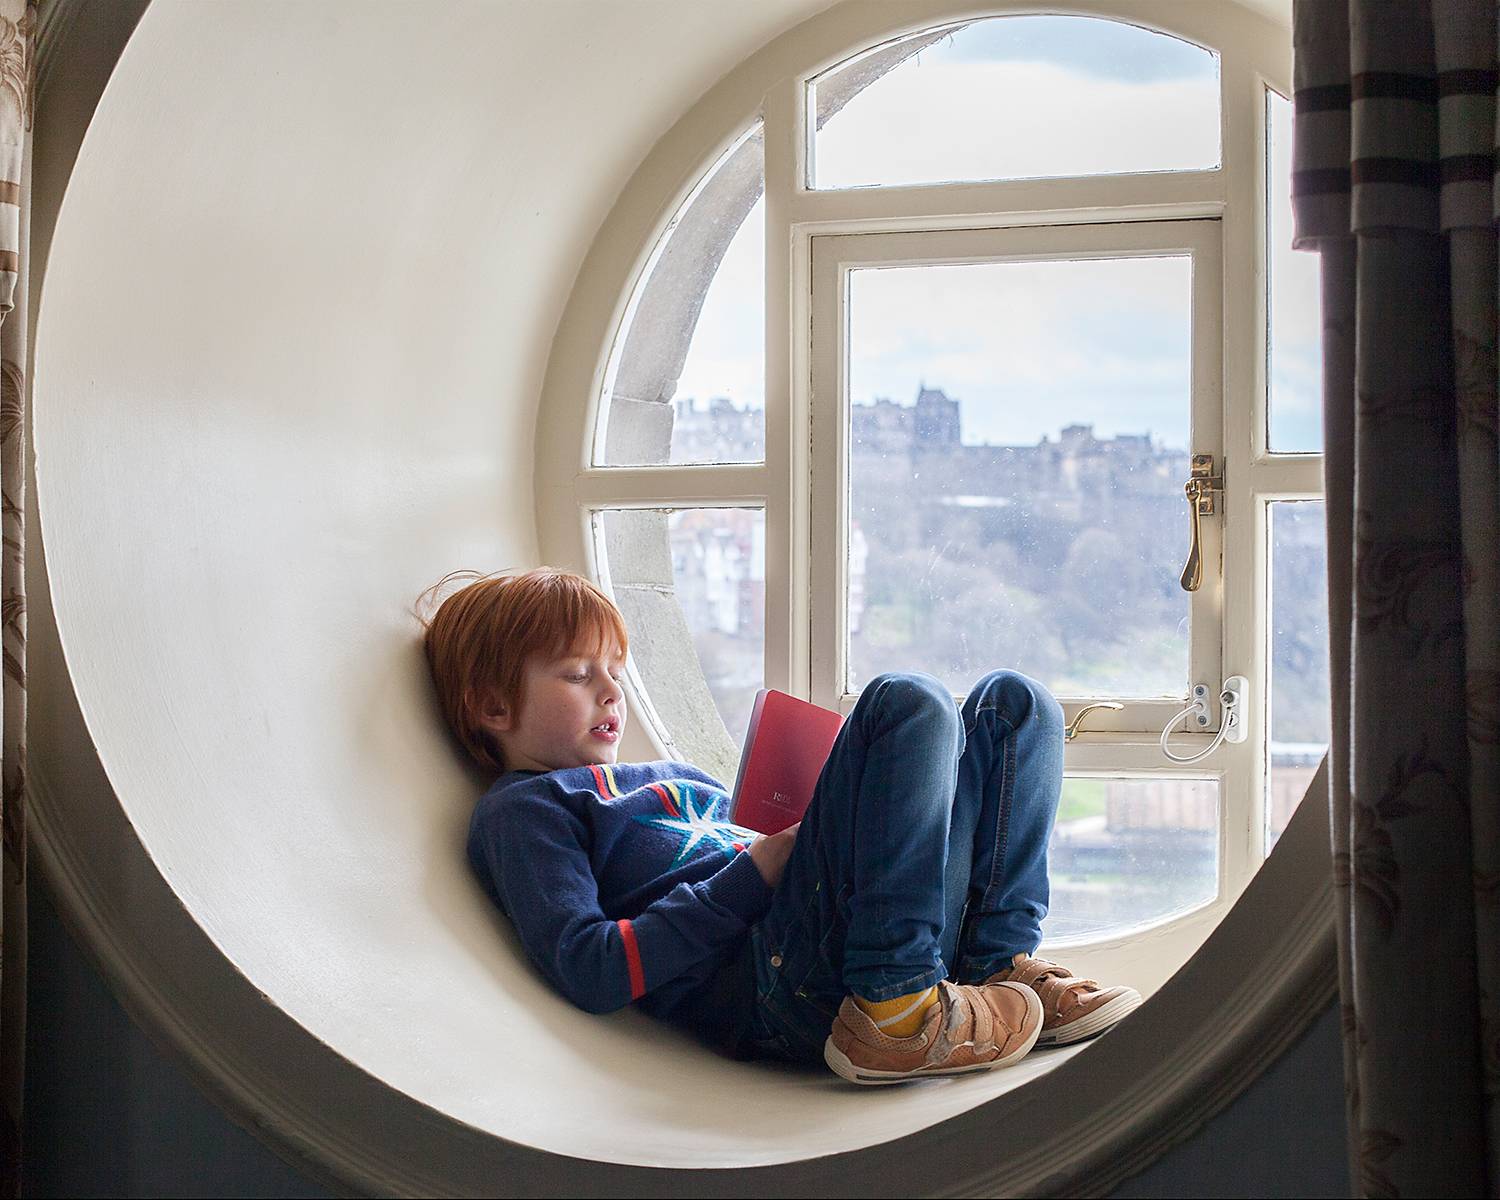 So that's what's through the round window:&nbsp;Oscar and his hotel 'passport', with Edinburgh Castle in the background